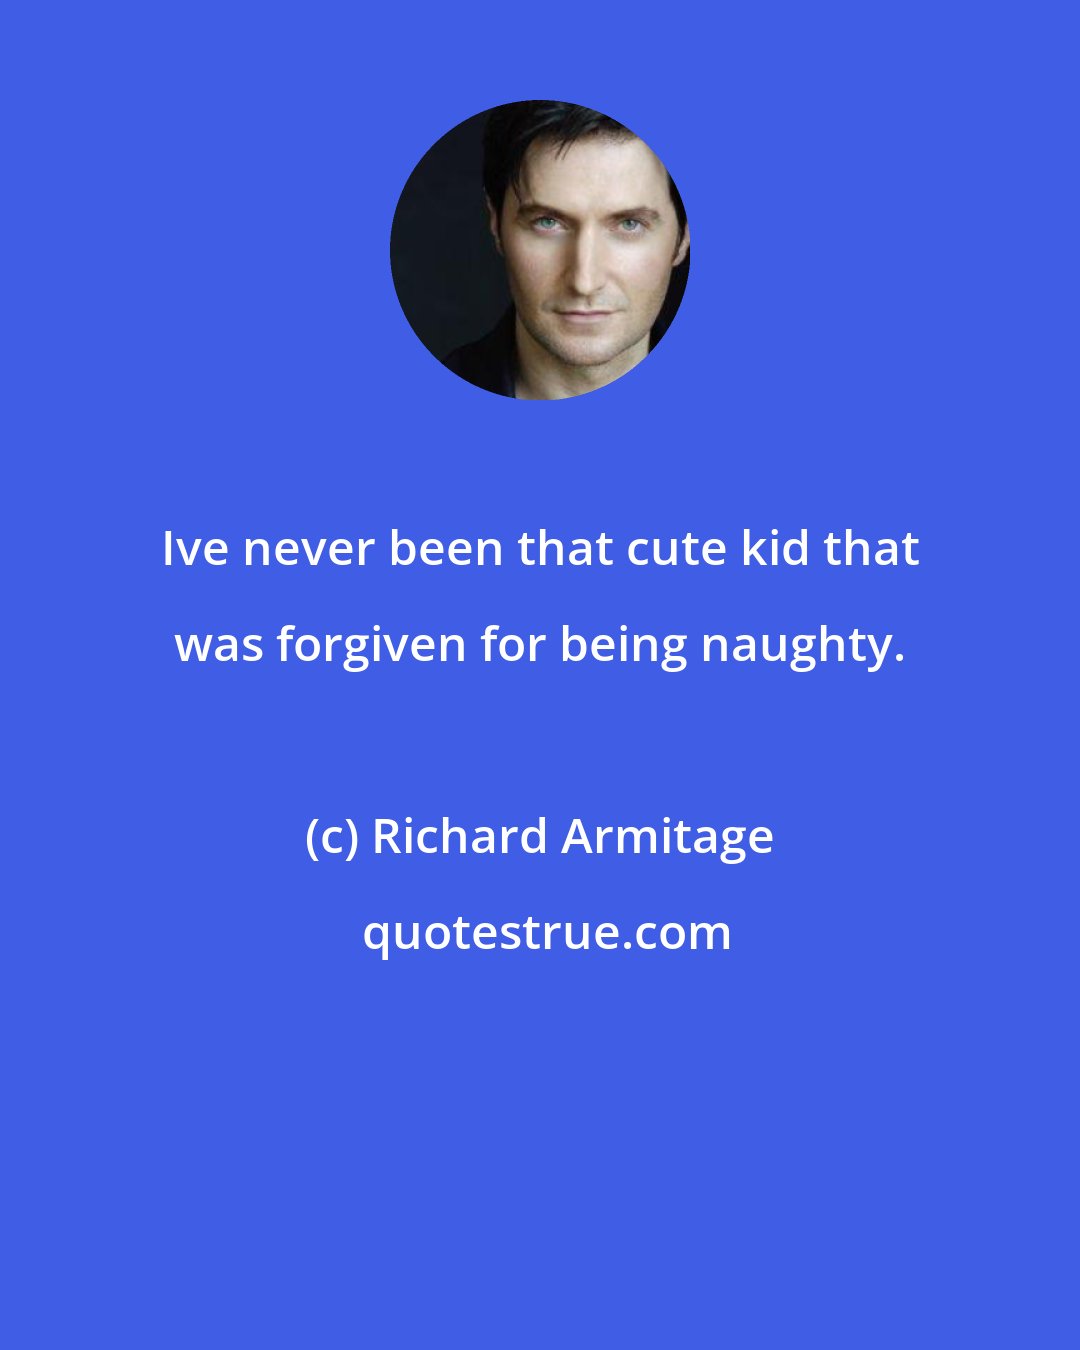 Richard Armitage: Ive never been that cute kid that was forgiven for being naughty.